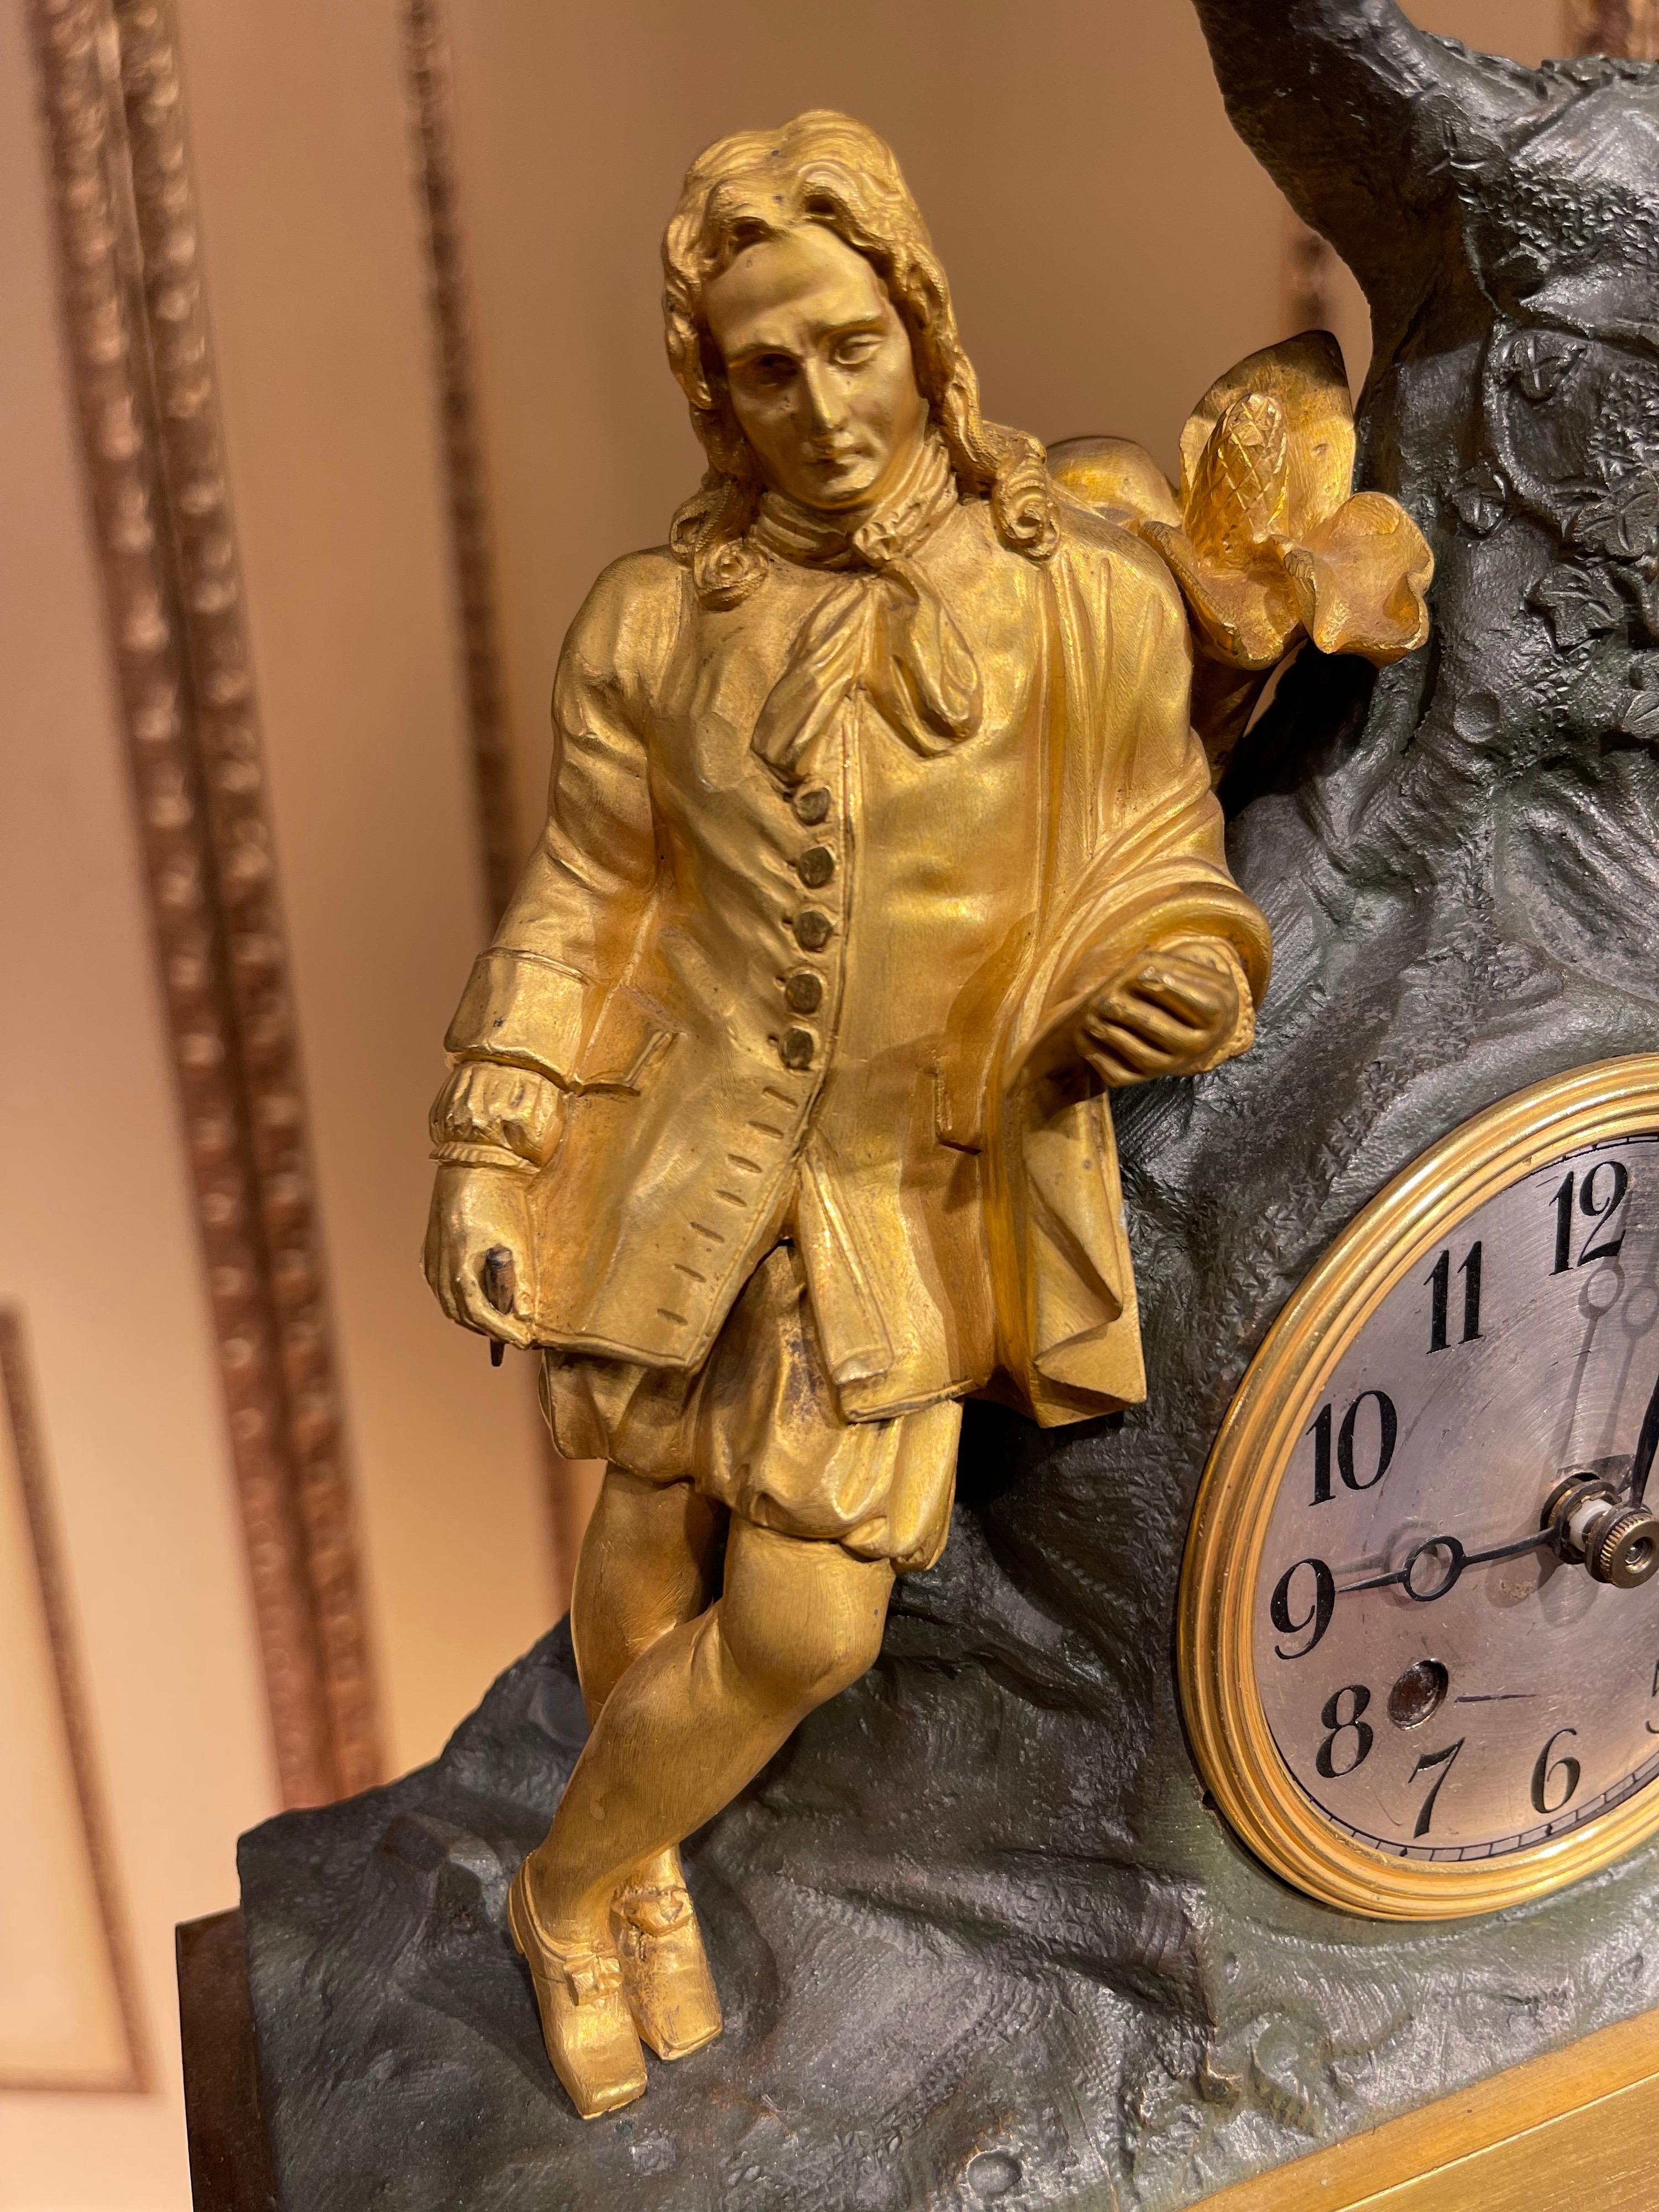 Antique Mantel Clock from around 1850, France, Fire-Gilded For Sale 4